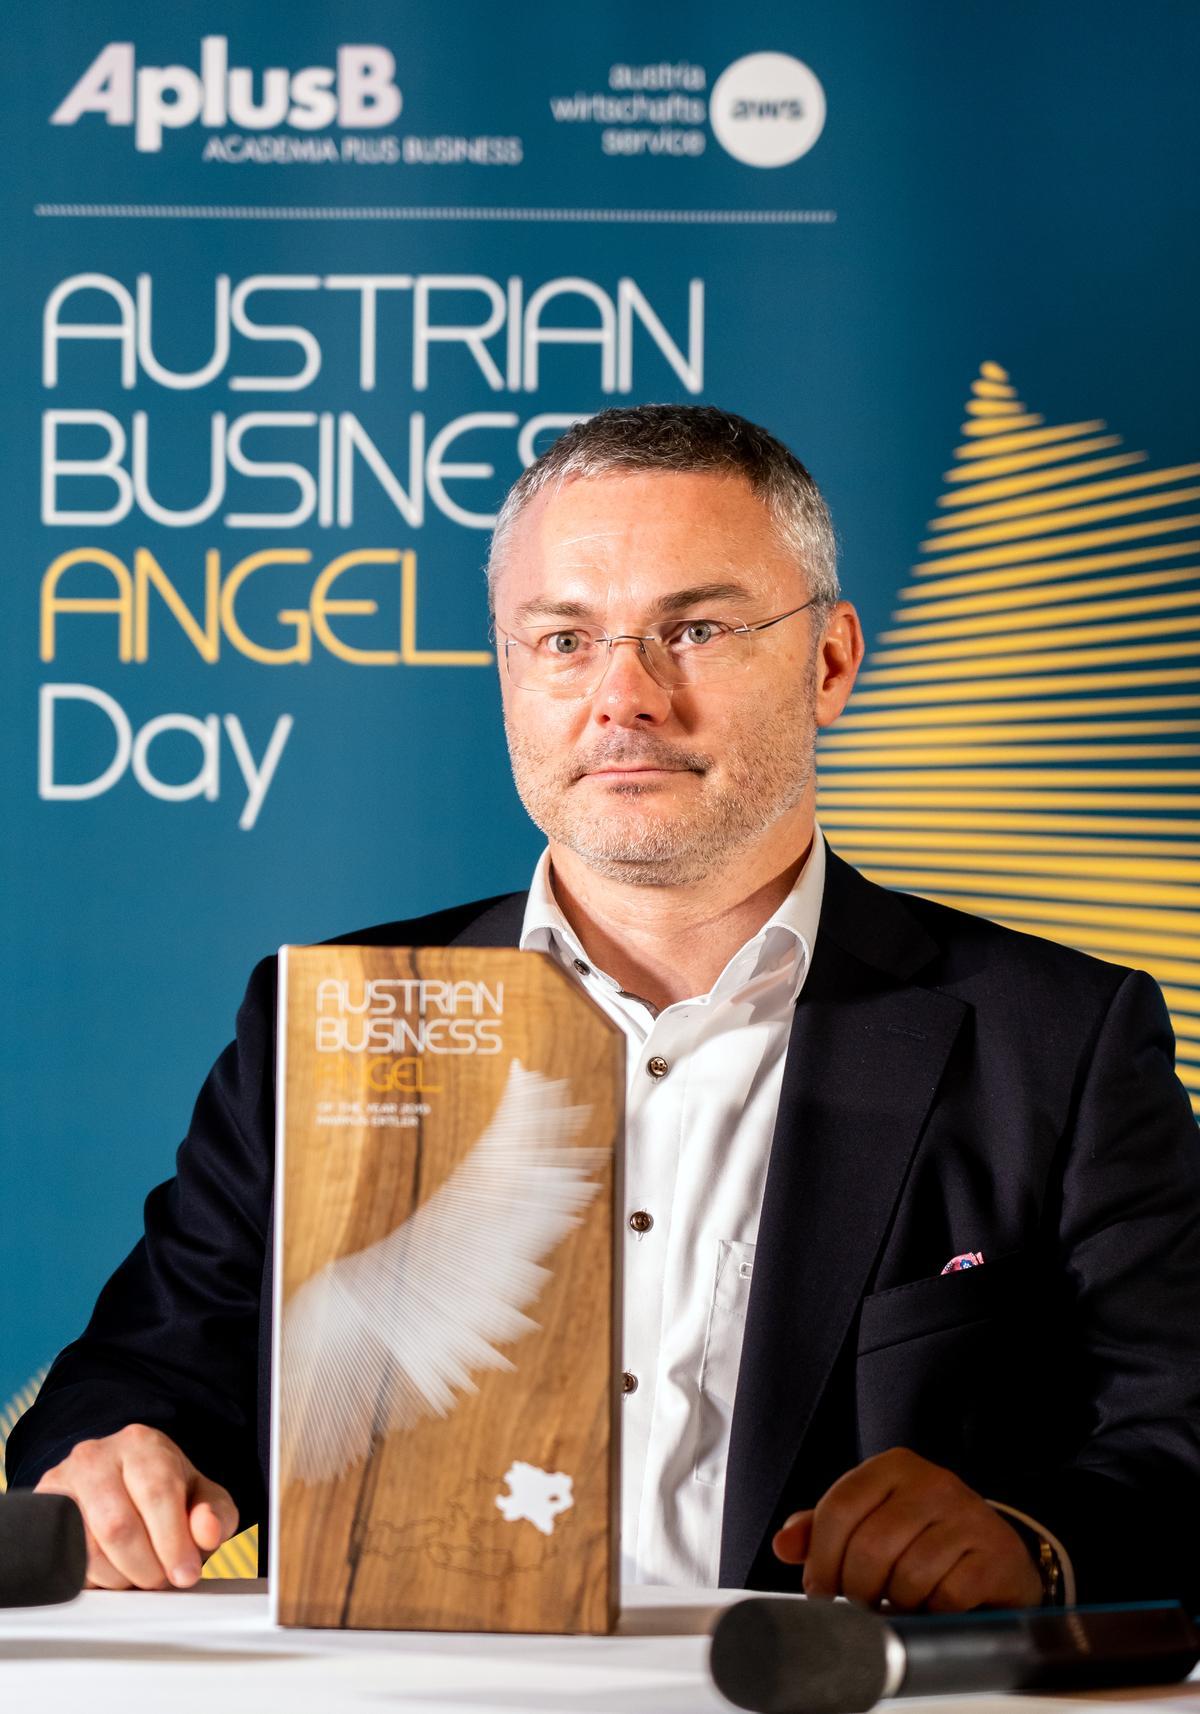 Business Angel Day Award mit Person